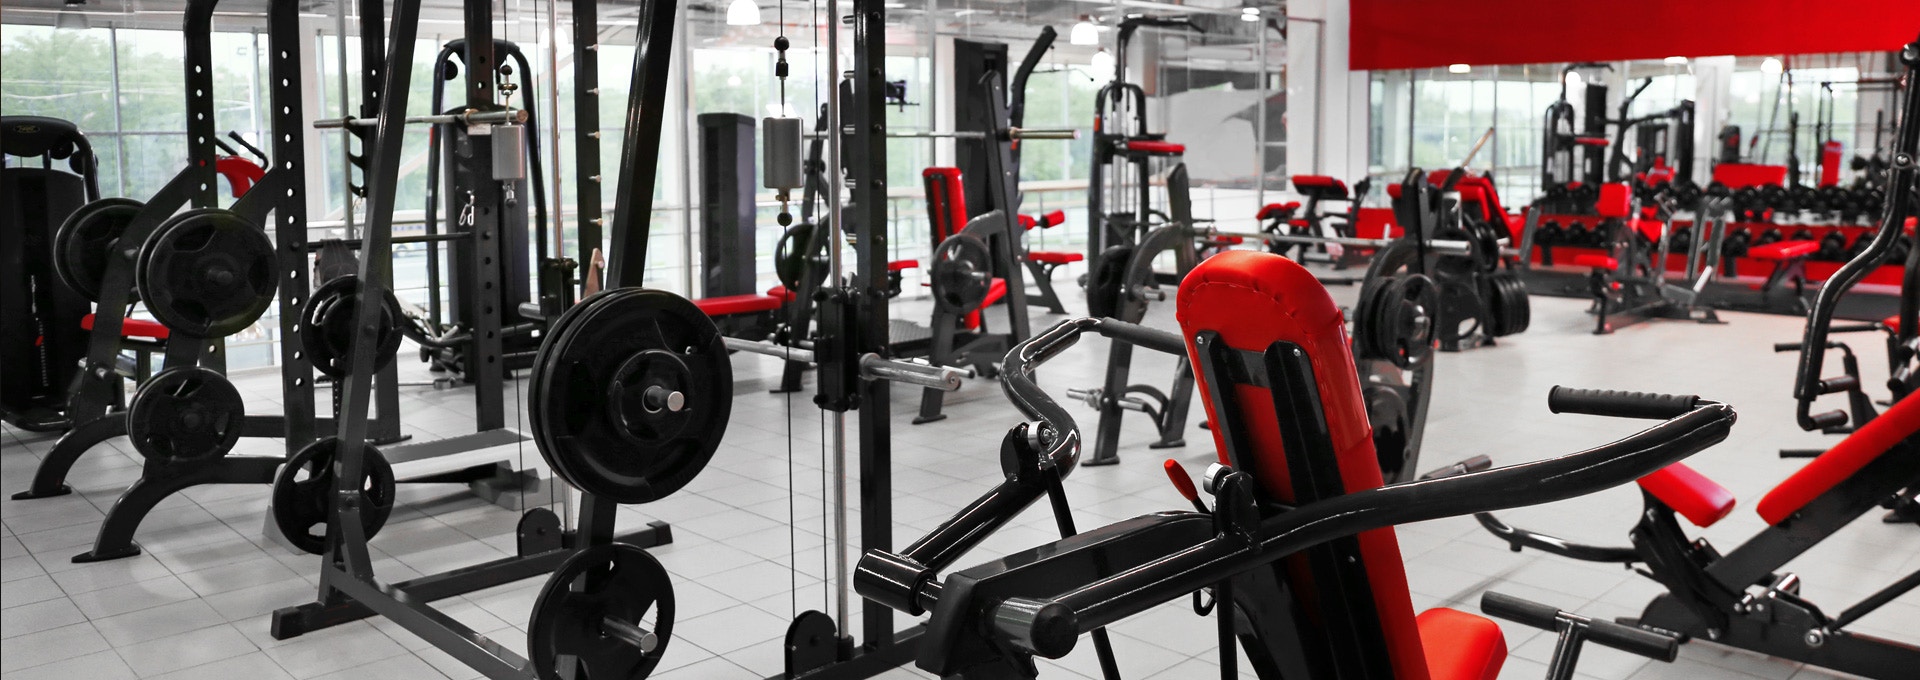 What is your in-gym marketing strategy?